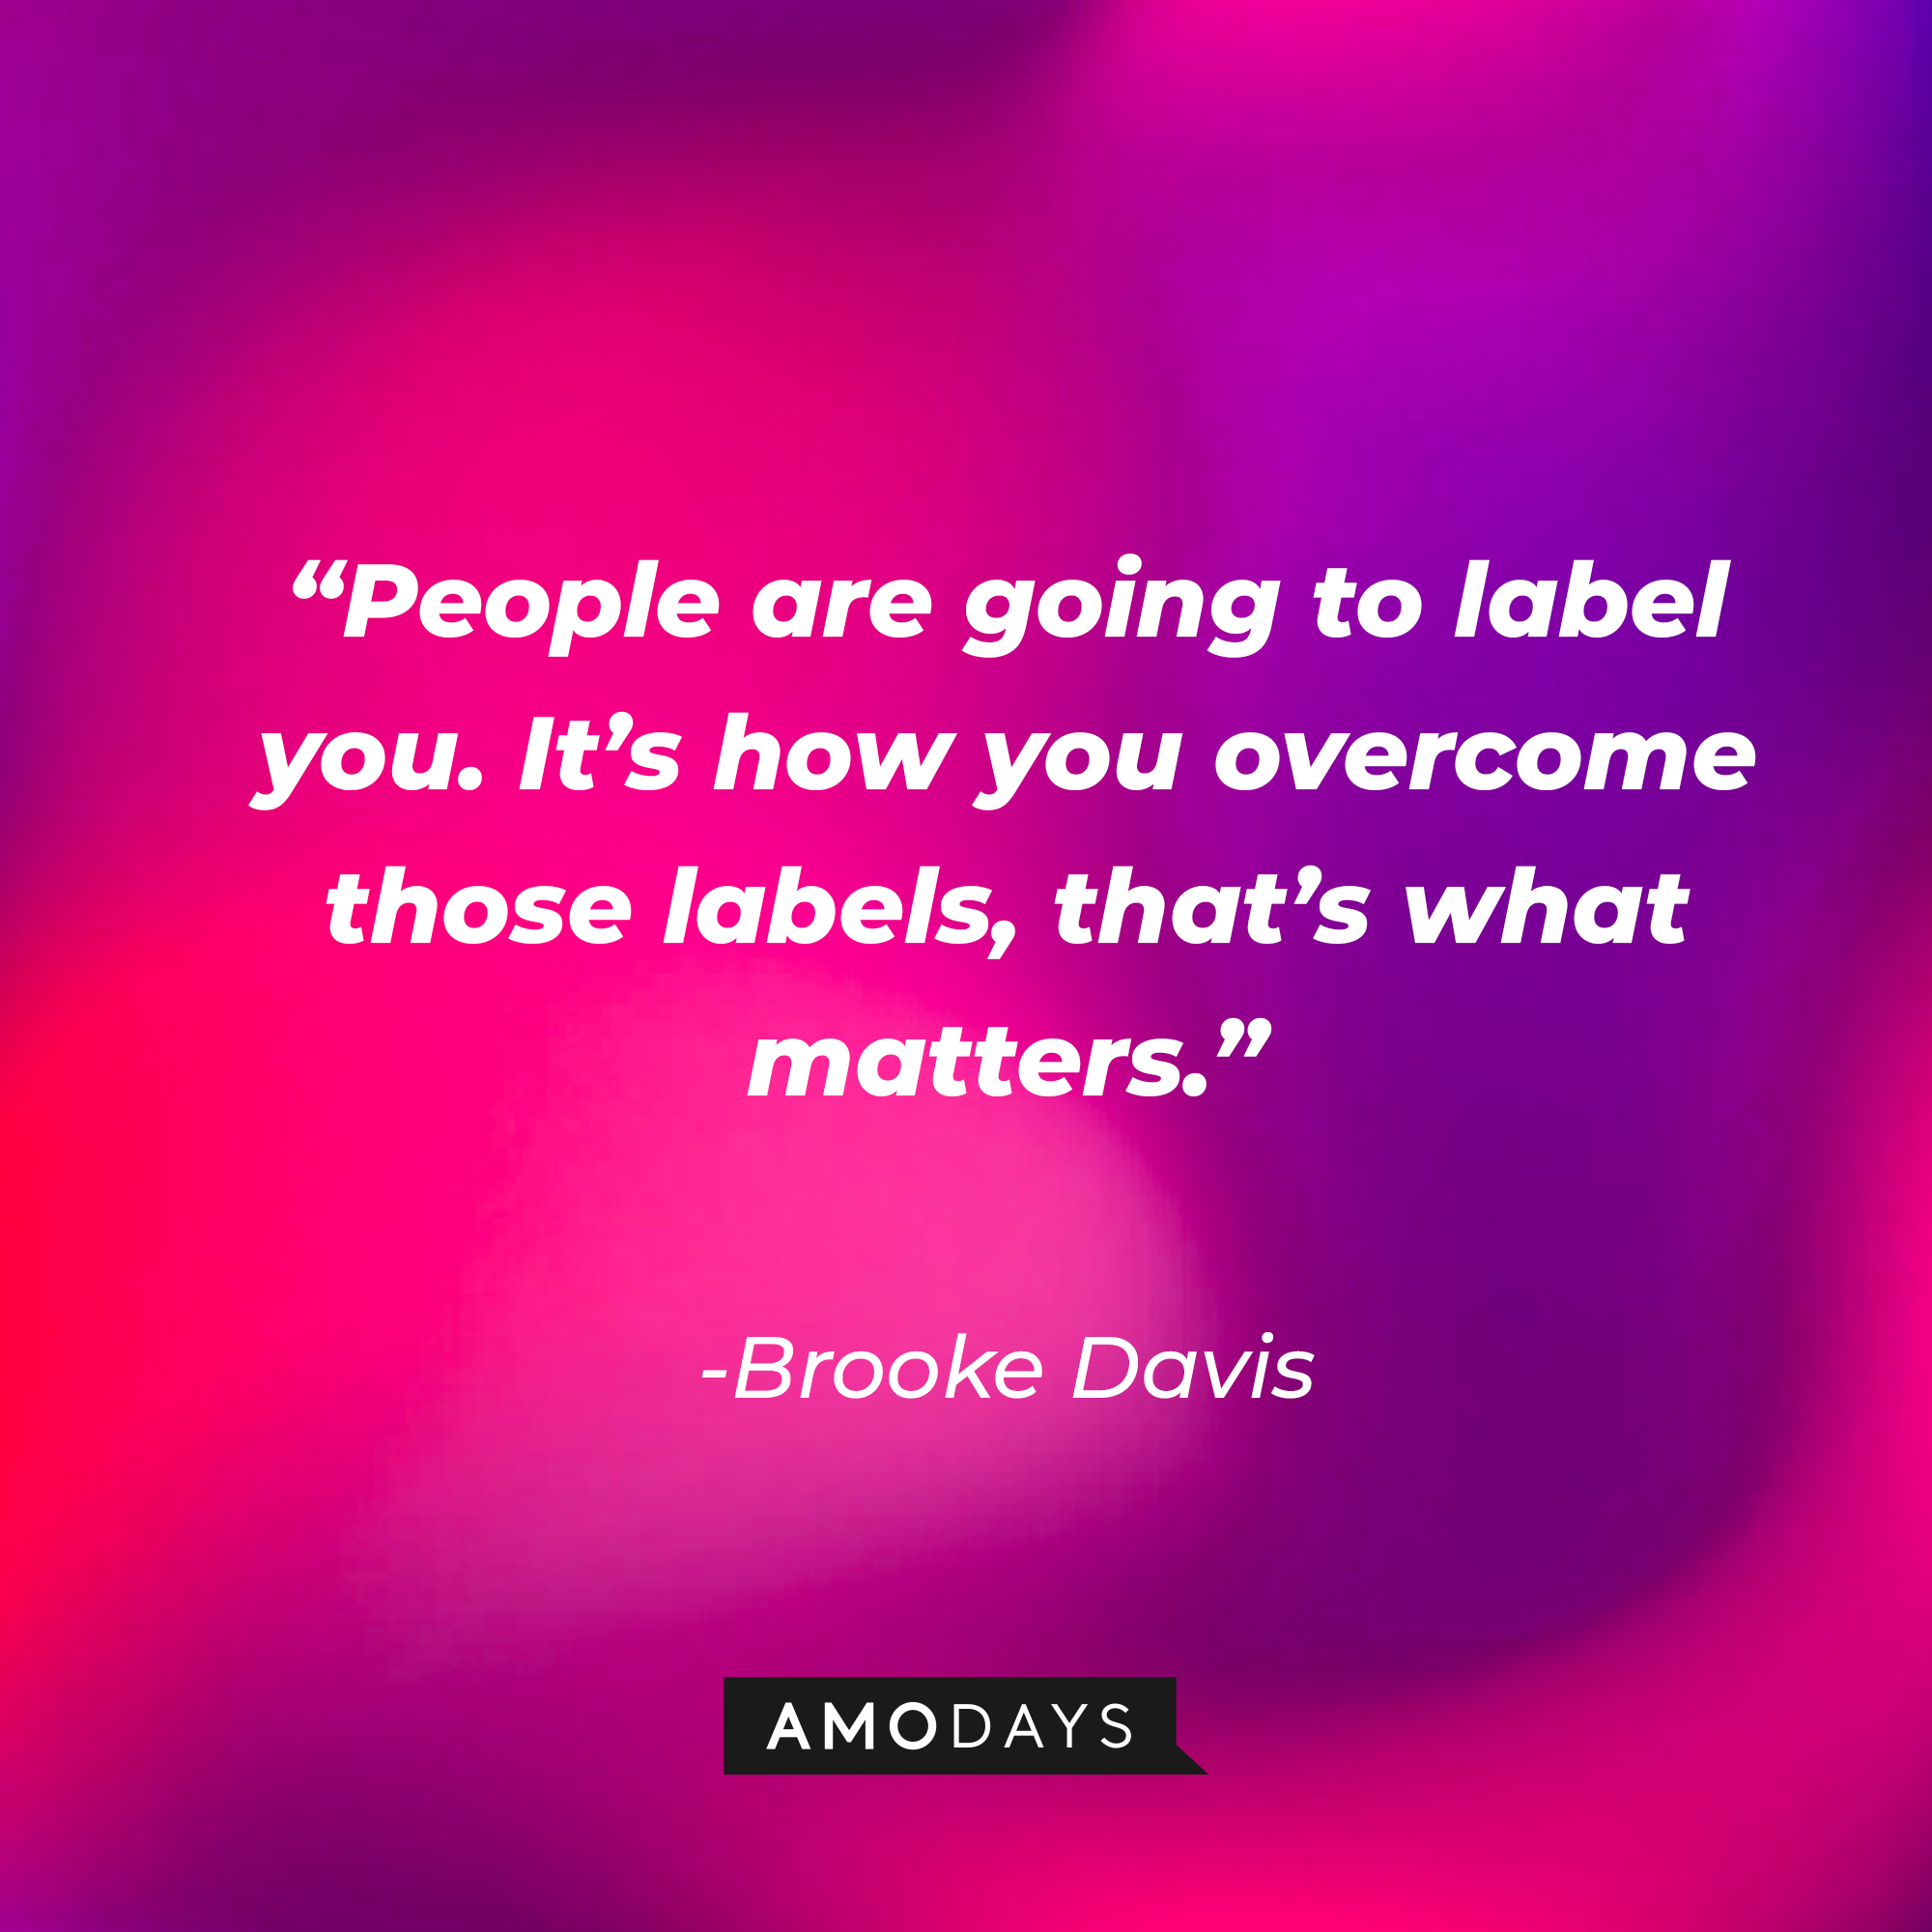 Brooke Davis’ quote: “People are going to label you. It’s how you overcome those labels, that’s what matters.” | Source: AmoDays